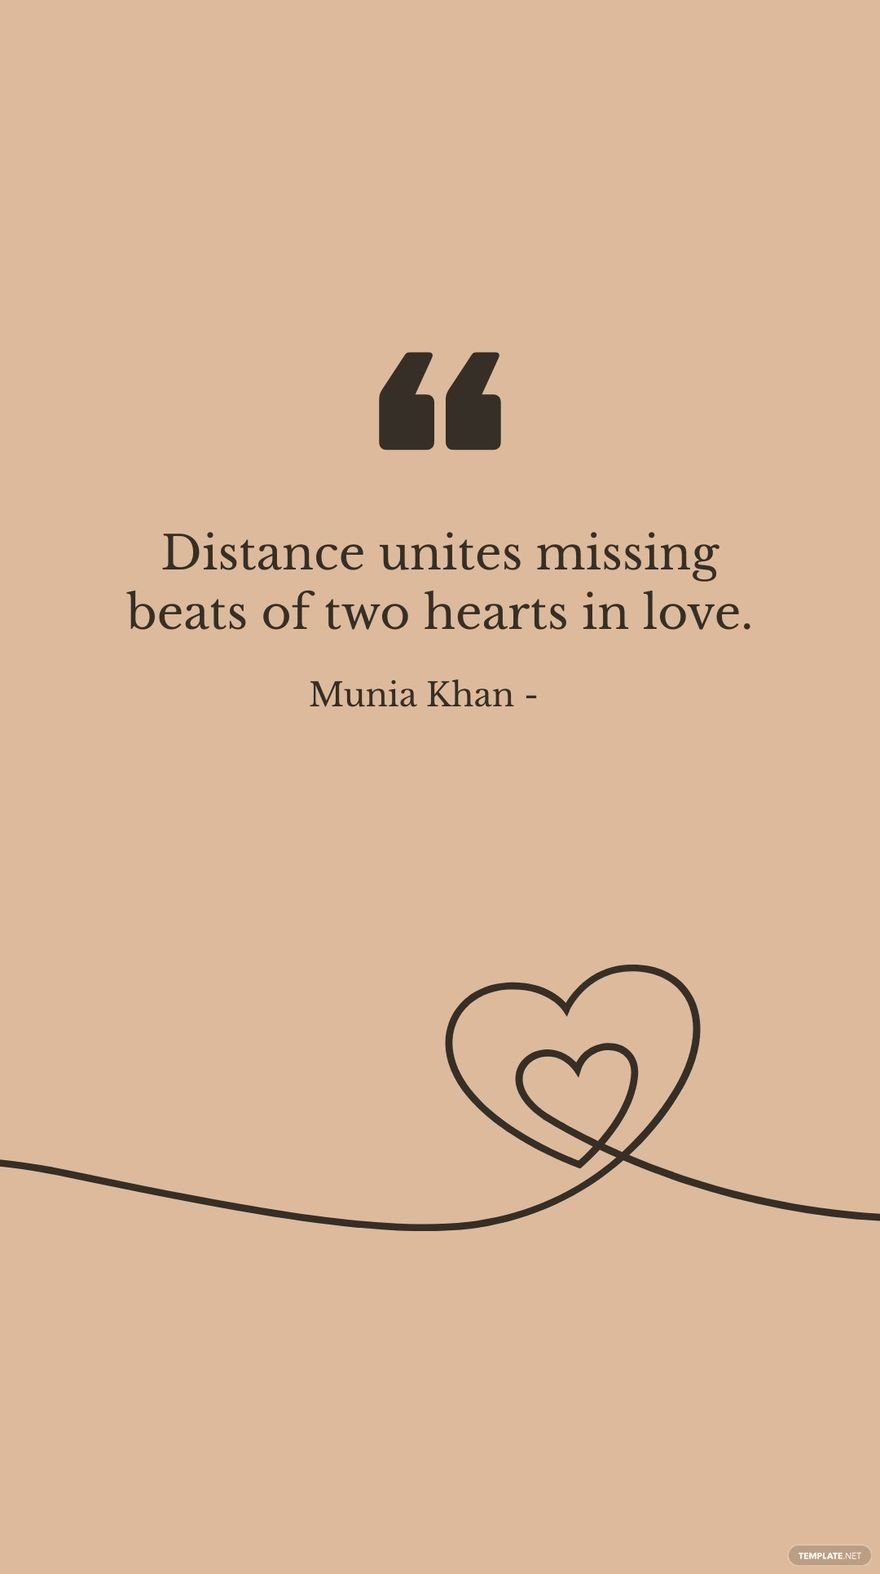 Free Munia Khan - Distance unites missing beats of two hearts in love. in JPG